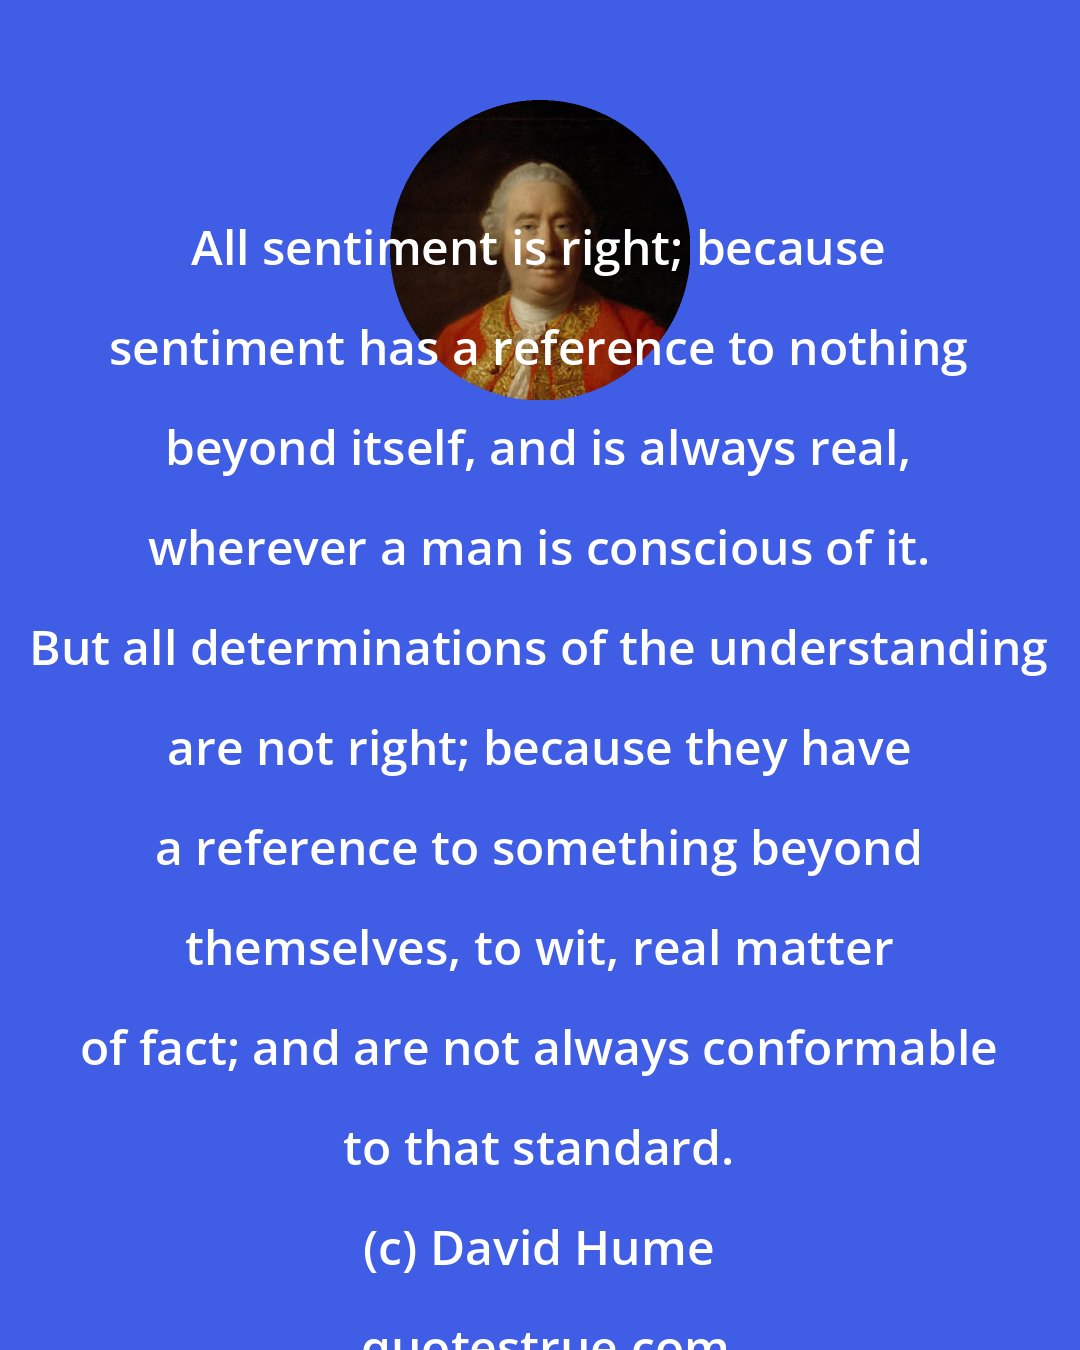 David Hume: All sentiment is right; because sentiment has a reference to nothing beyond itself, and is always real, wherever a man is conscious of it. But all determinations of the understanding are not right; because they have a reference to something beyond themselves, to wit, real matter of fact; and are not always conformable to that standard.